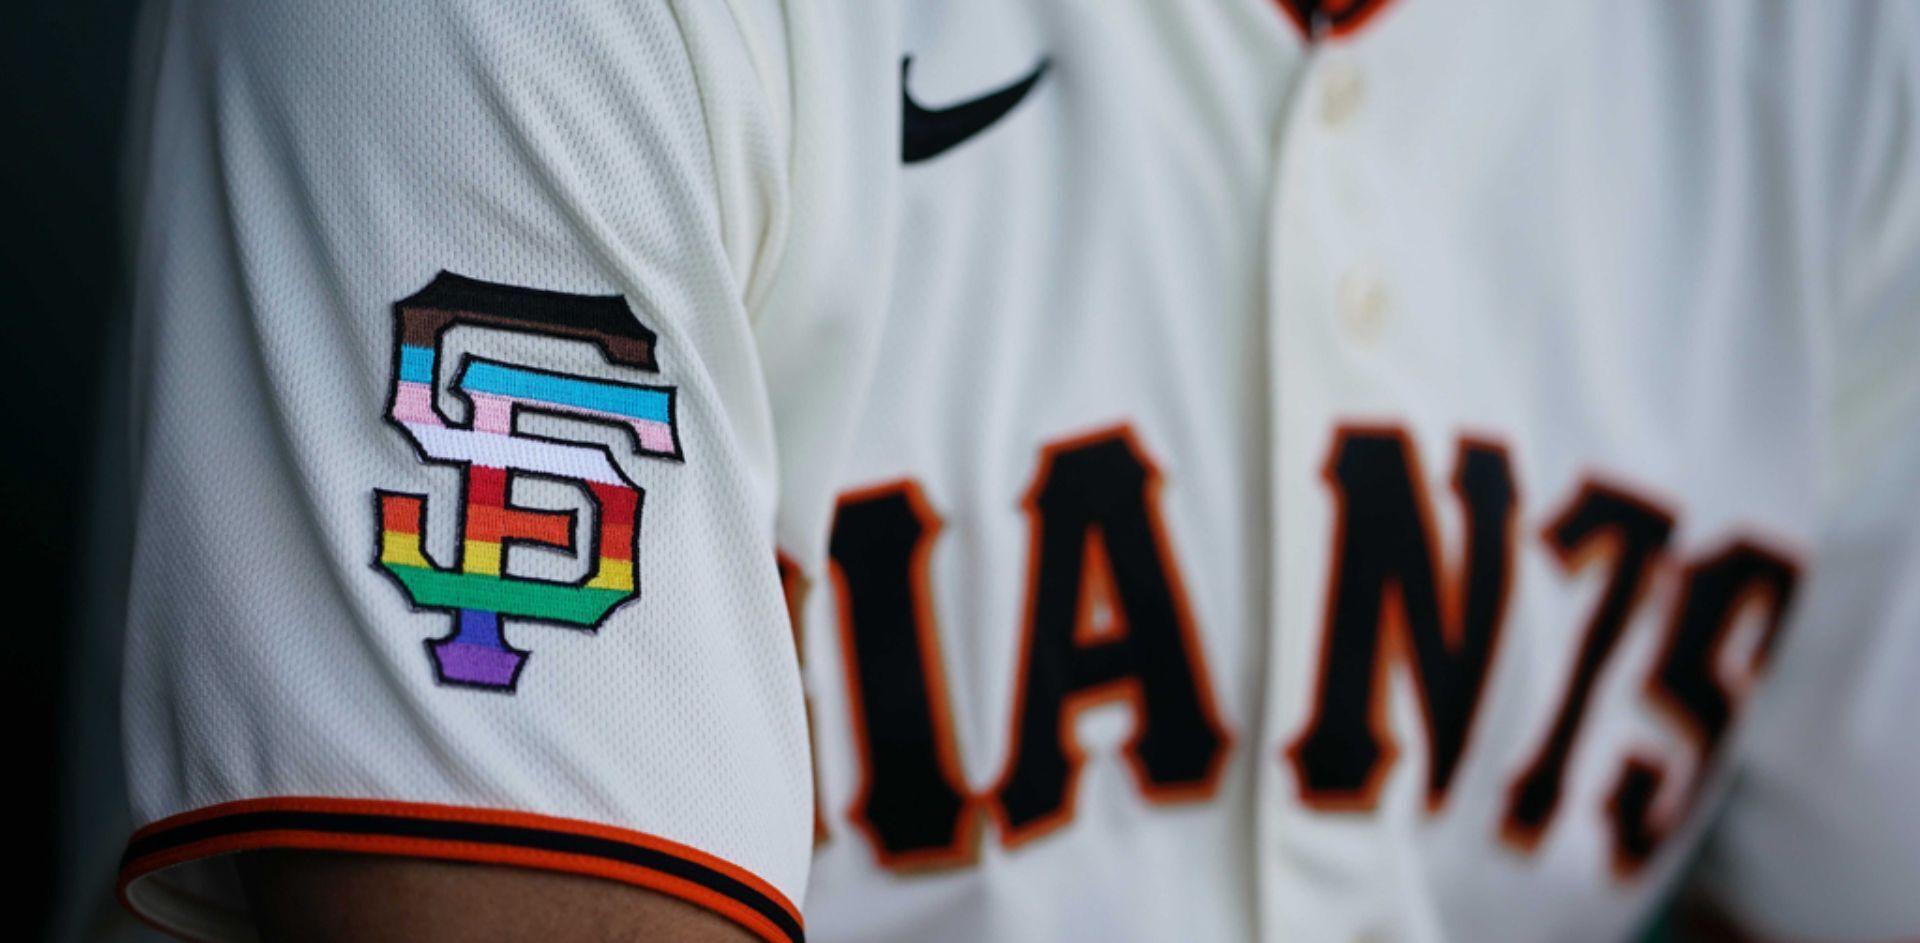 Giants first team to wear pride colors on field